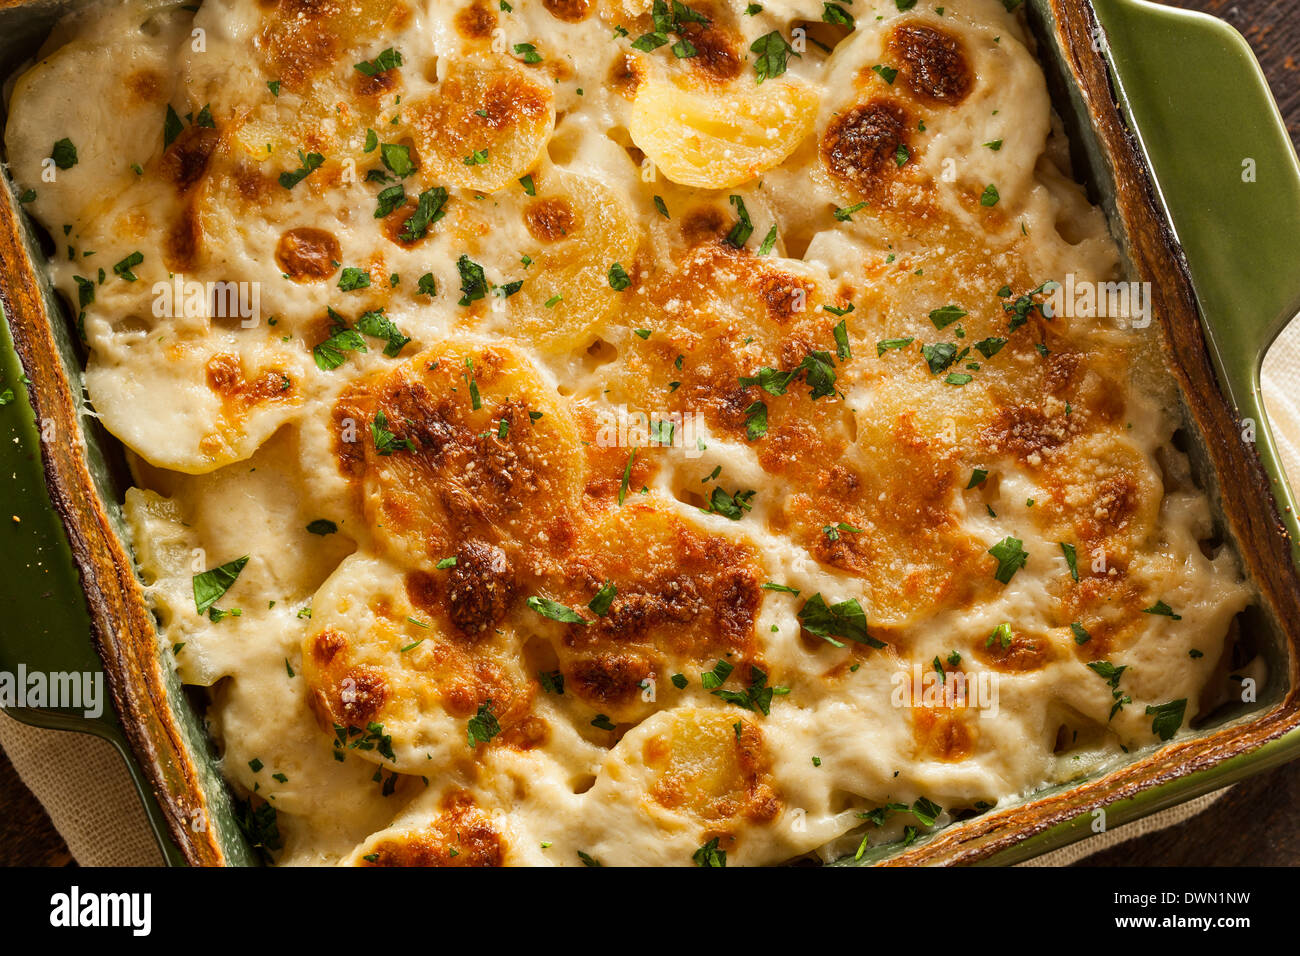 Homemade Cheesey Scalloped Potatoes with Parsley Flakes Stock Photo